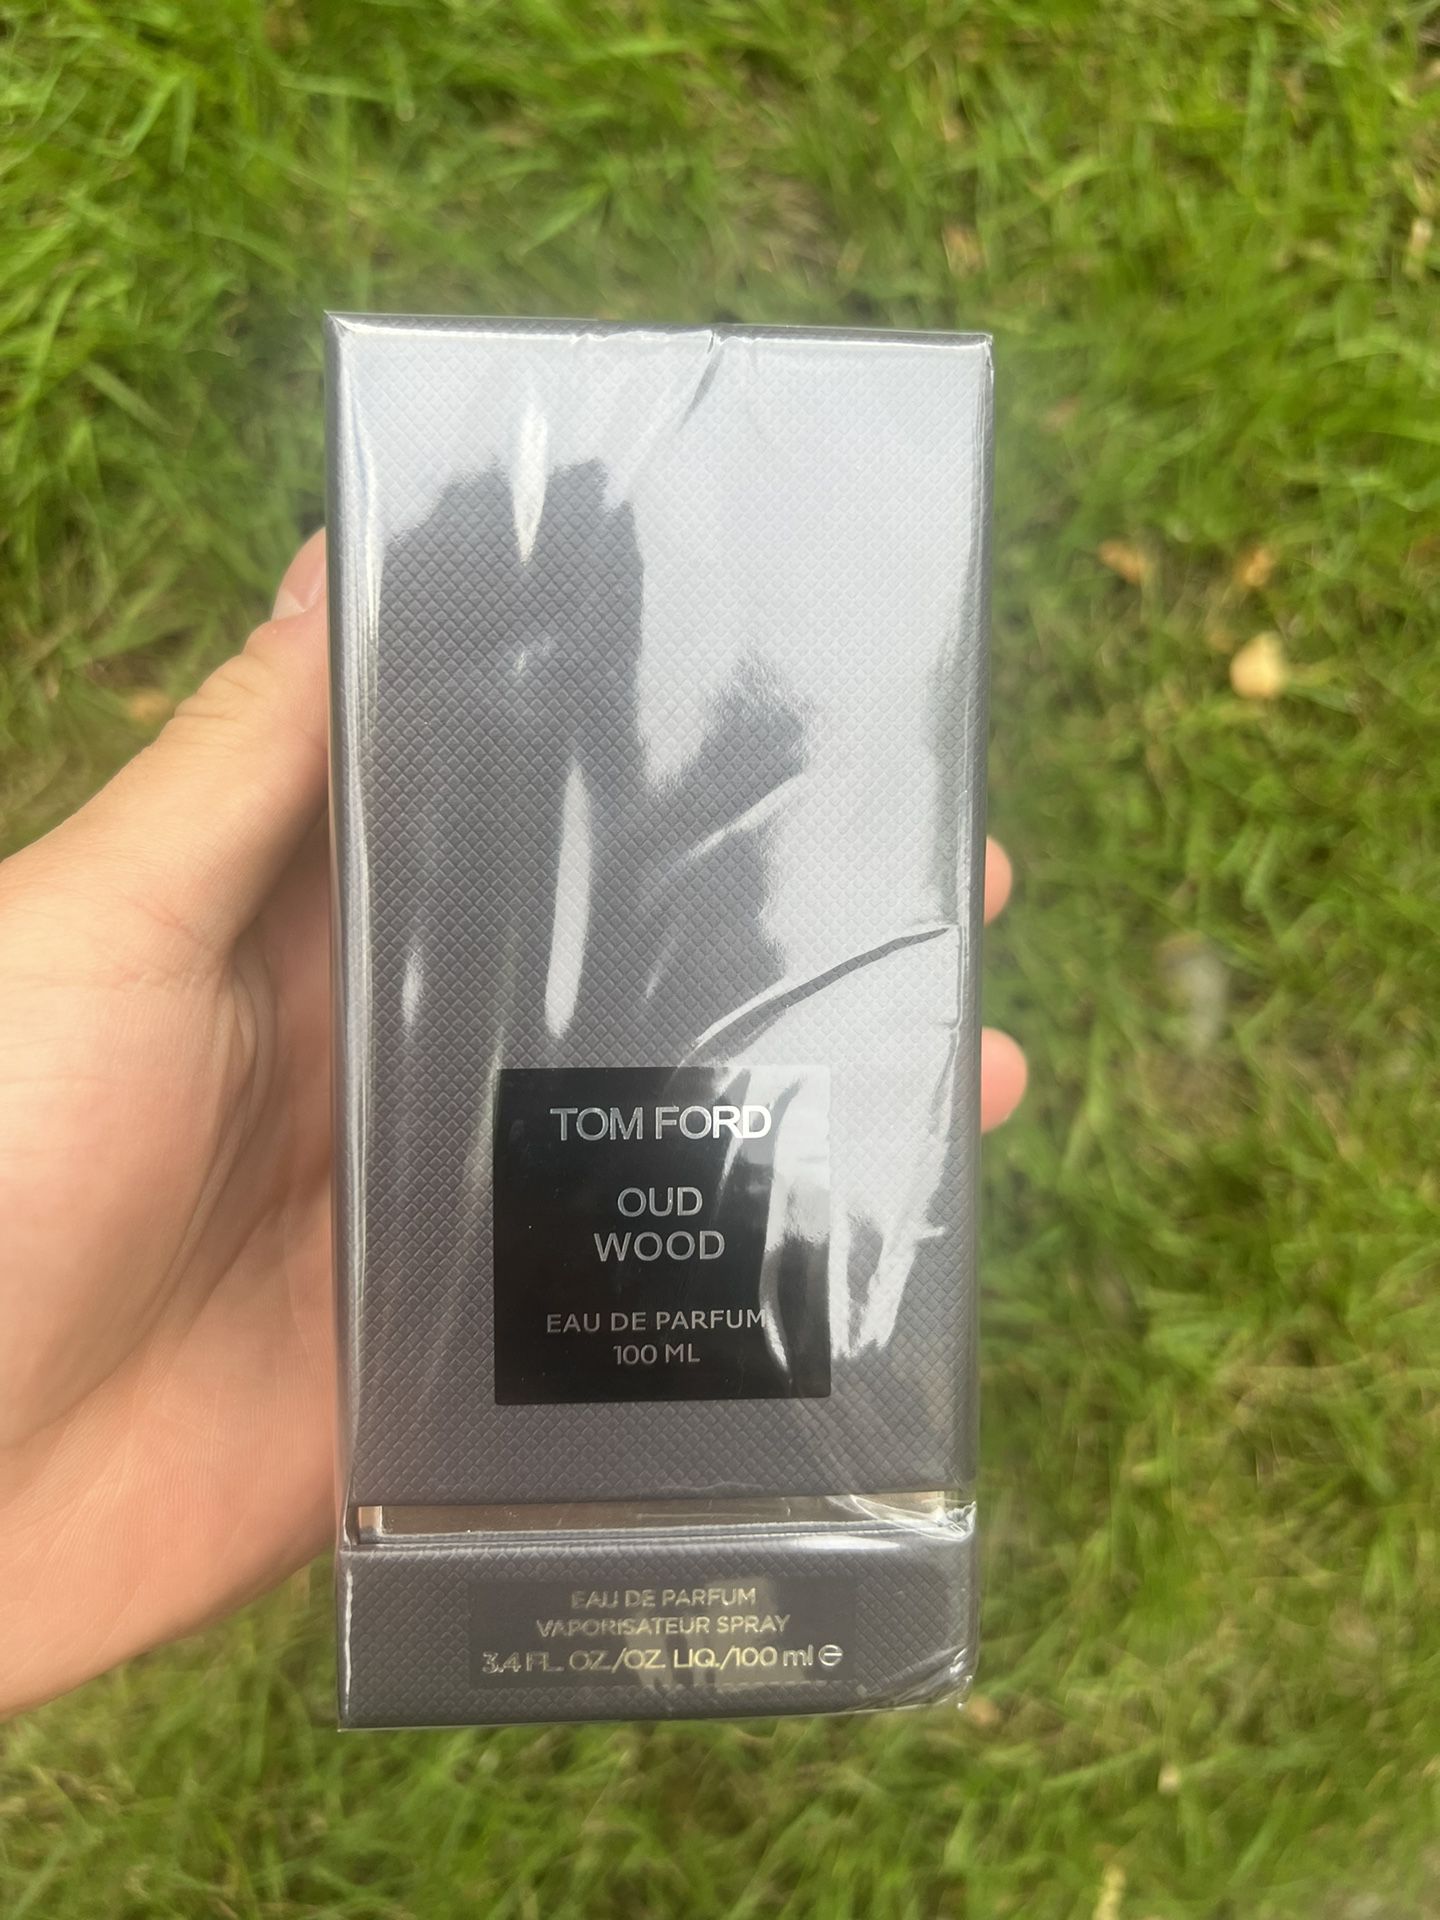 Tom Ford “Oud Wood” *BEST OFFER TAKES*